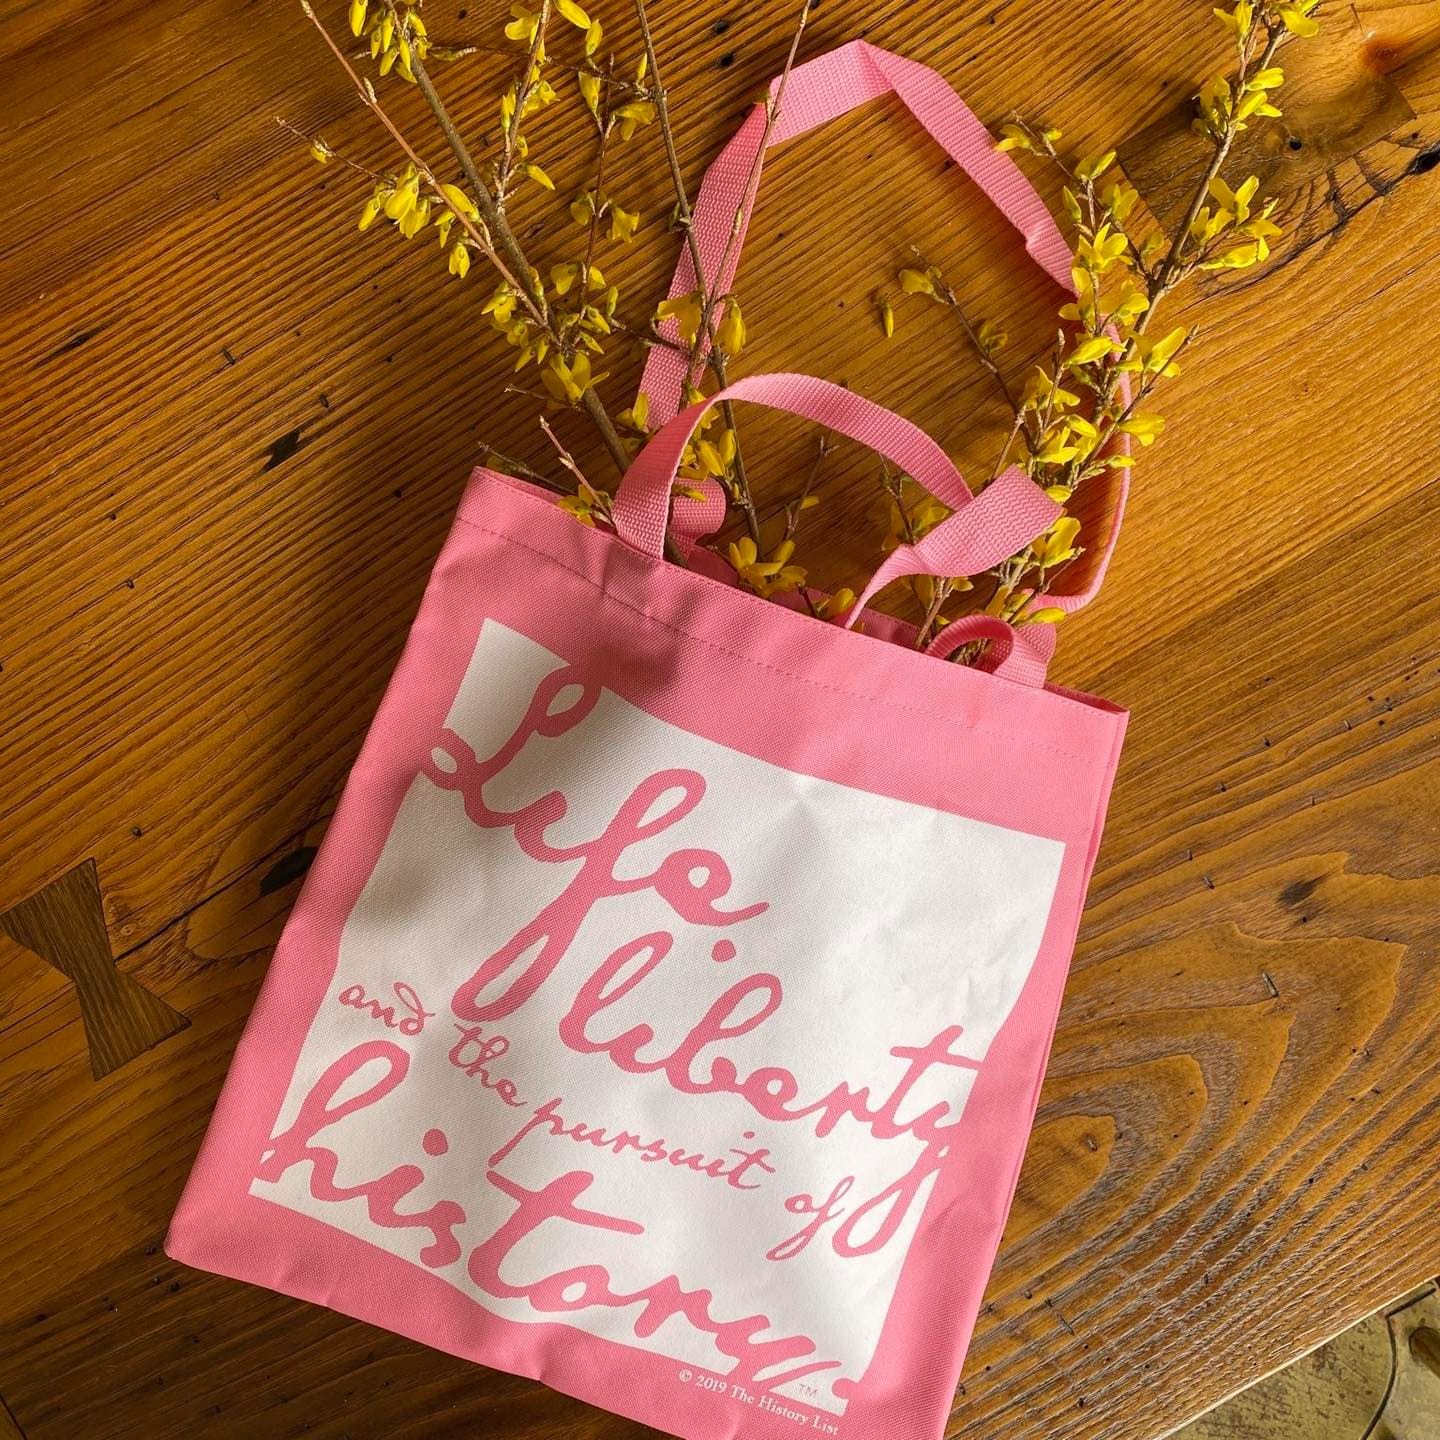 Pink "Life, liberty, and the pursuit of history" Tote bag - from the history list store